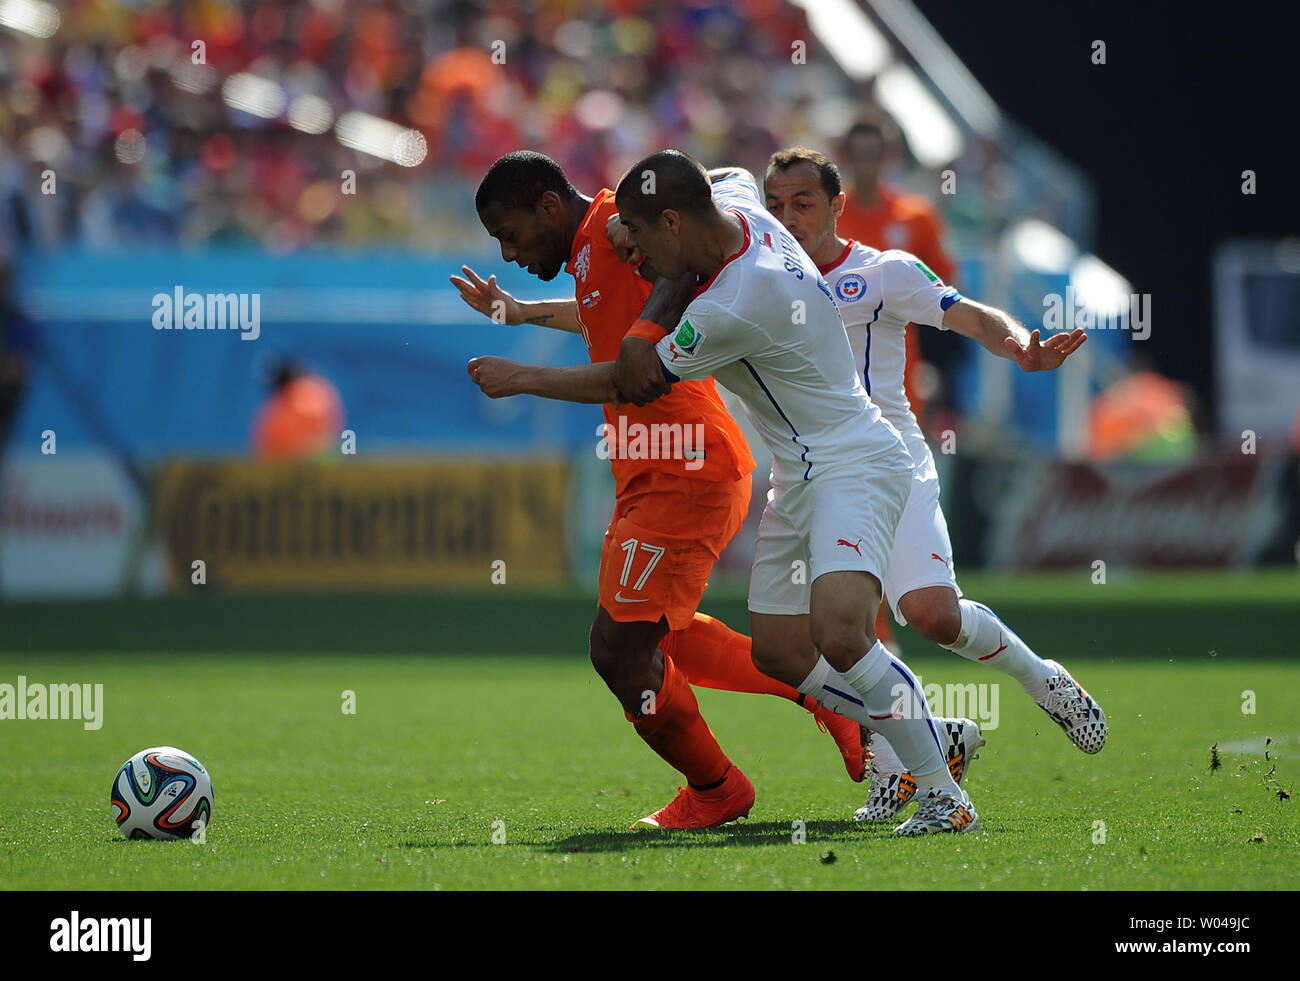 Jeremaine Lens (L) of the Netherlands competes with Francisco Silva of Chile during the 2014 FIFA World Cup Group B match at the Arena Corinthians in Sao Paulo, Brazil on June 23, 2014. UPI/Chris Brunskill Stock Photo